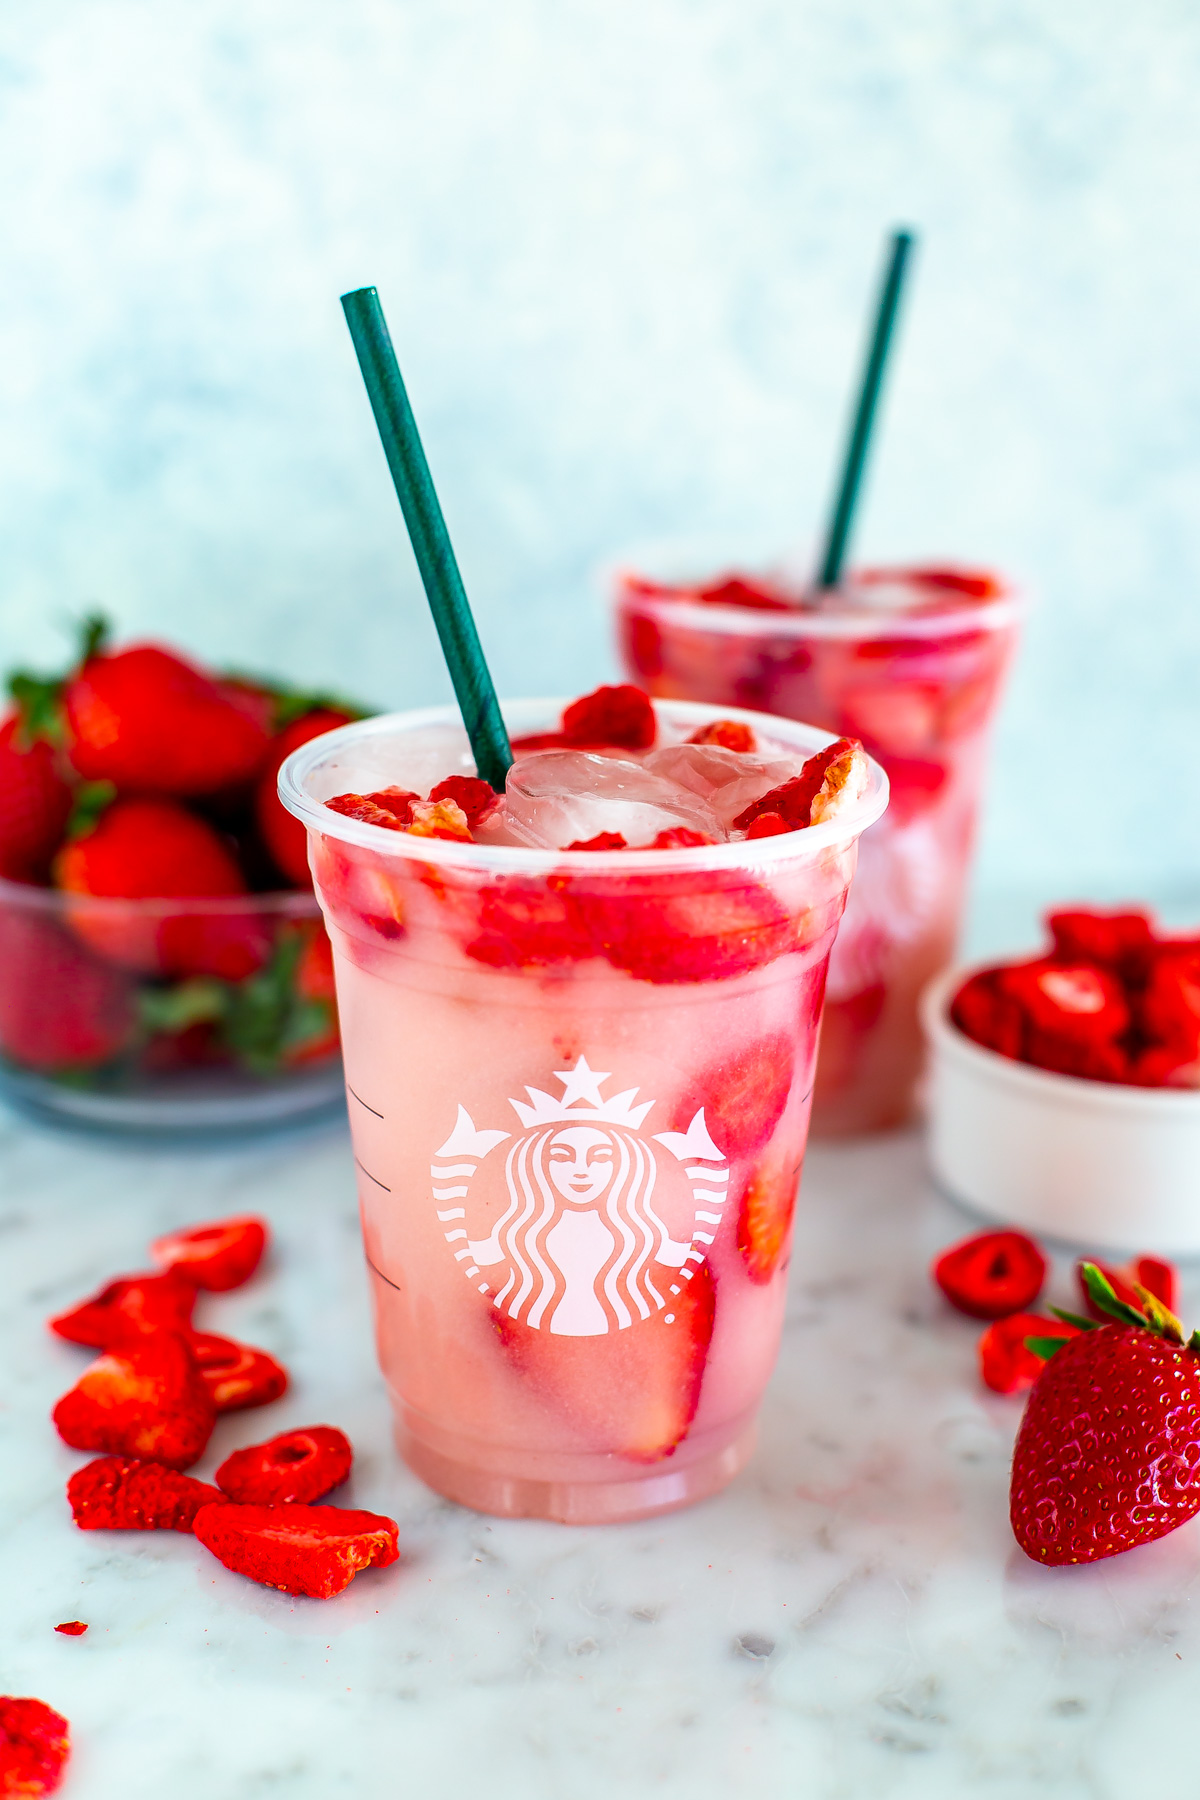 Two cups of homemade Starbucks pink drink with freeze-dried strawberries placed around them.